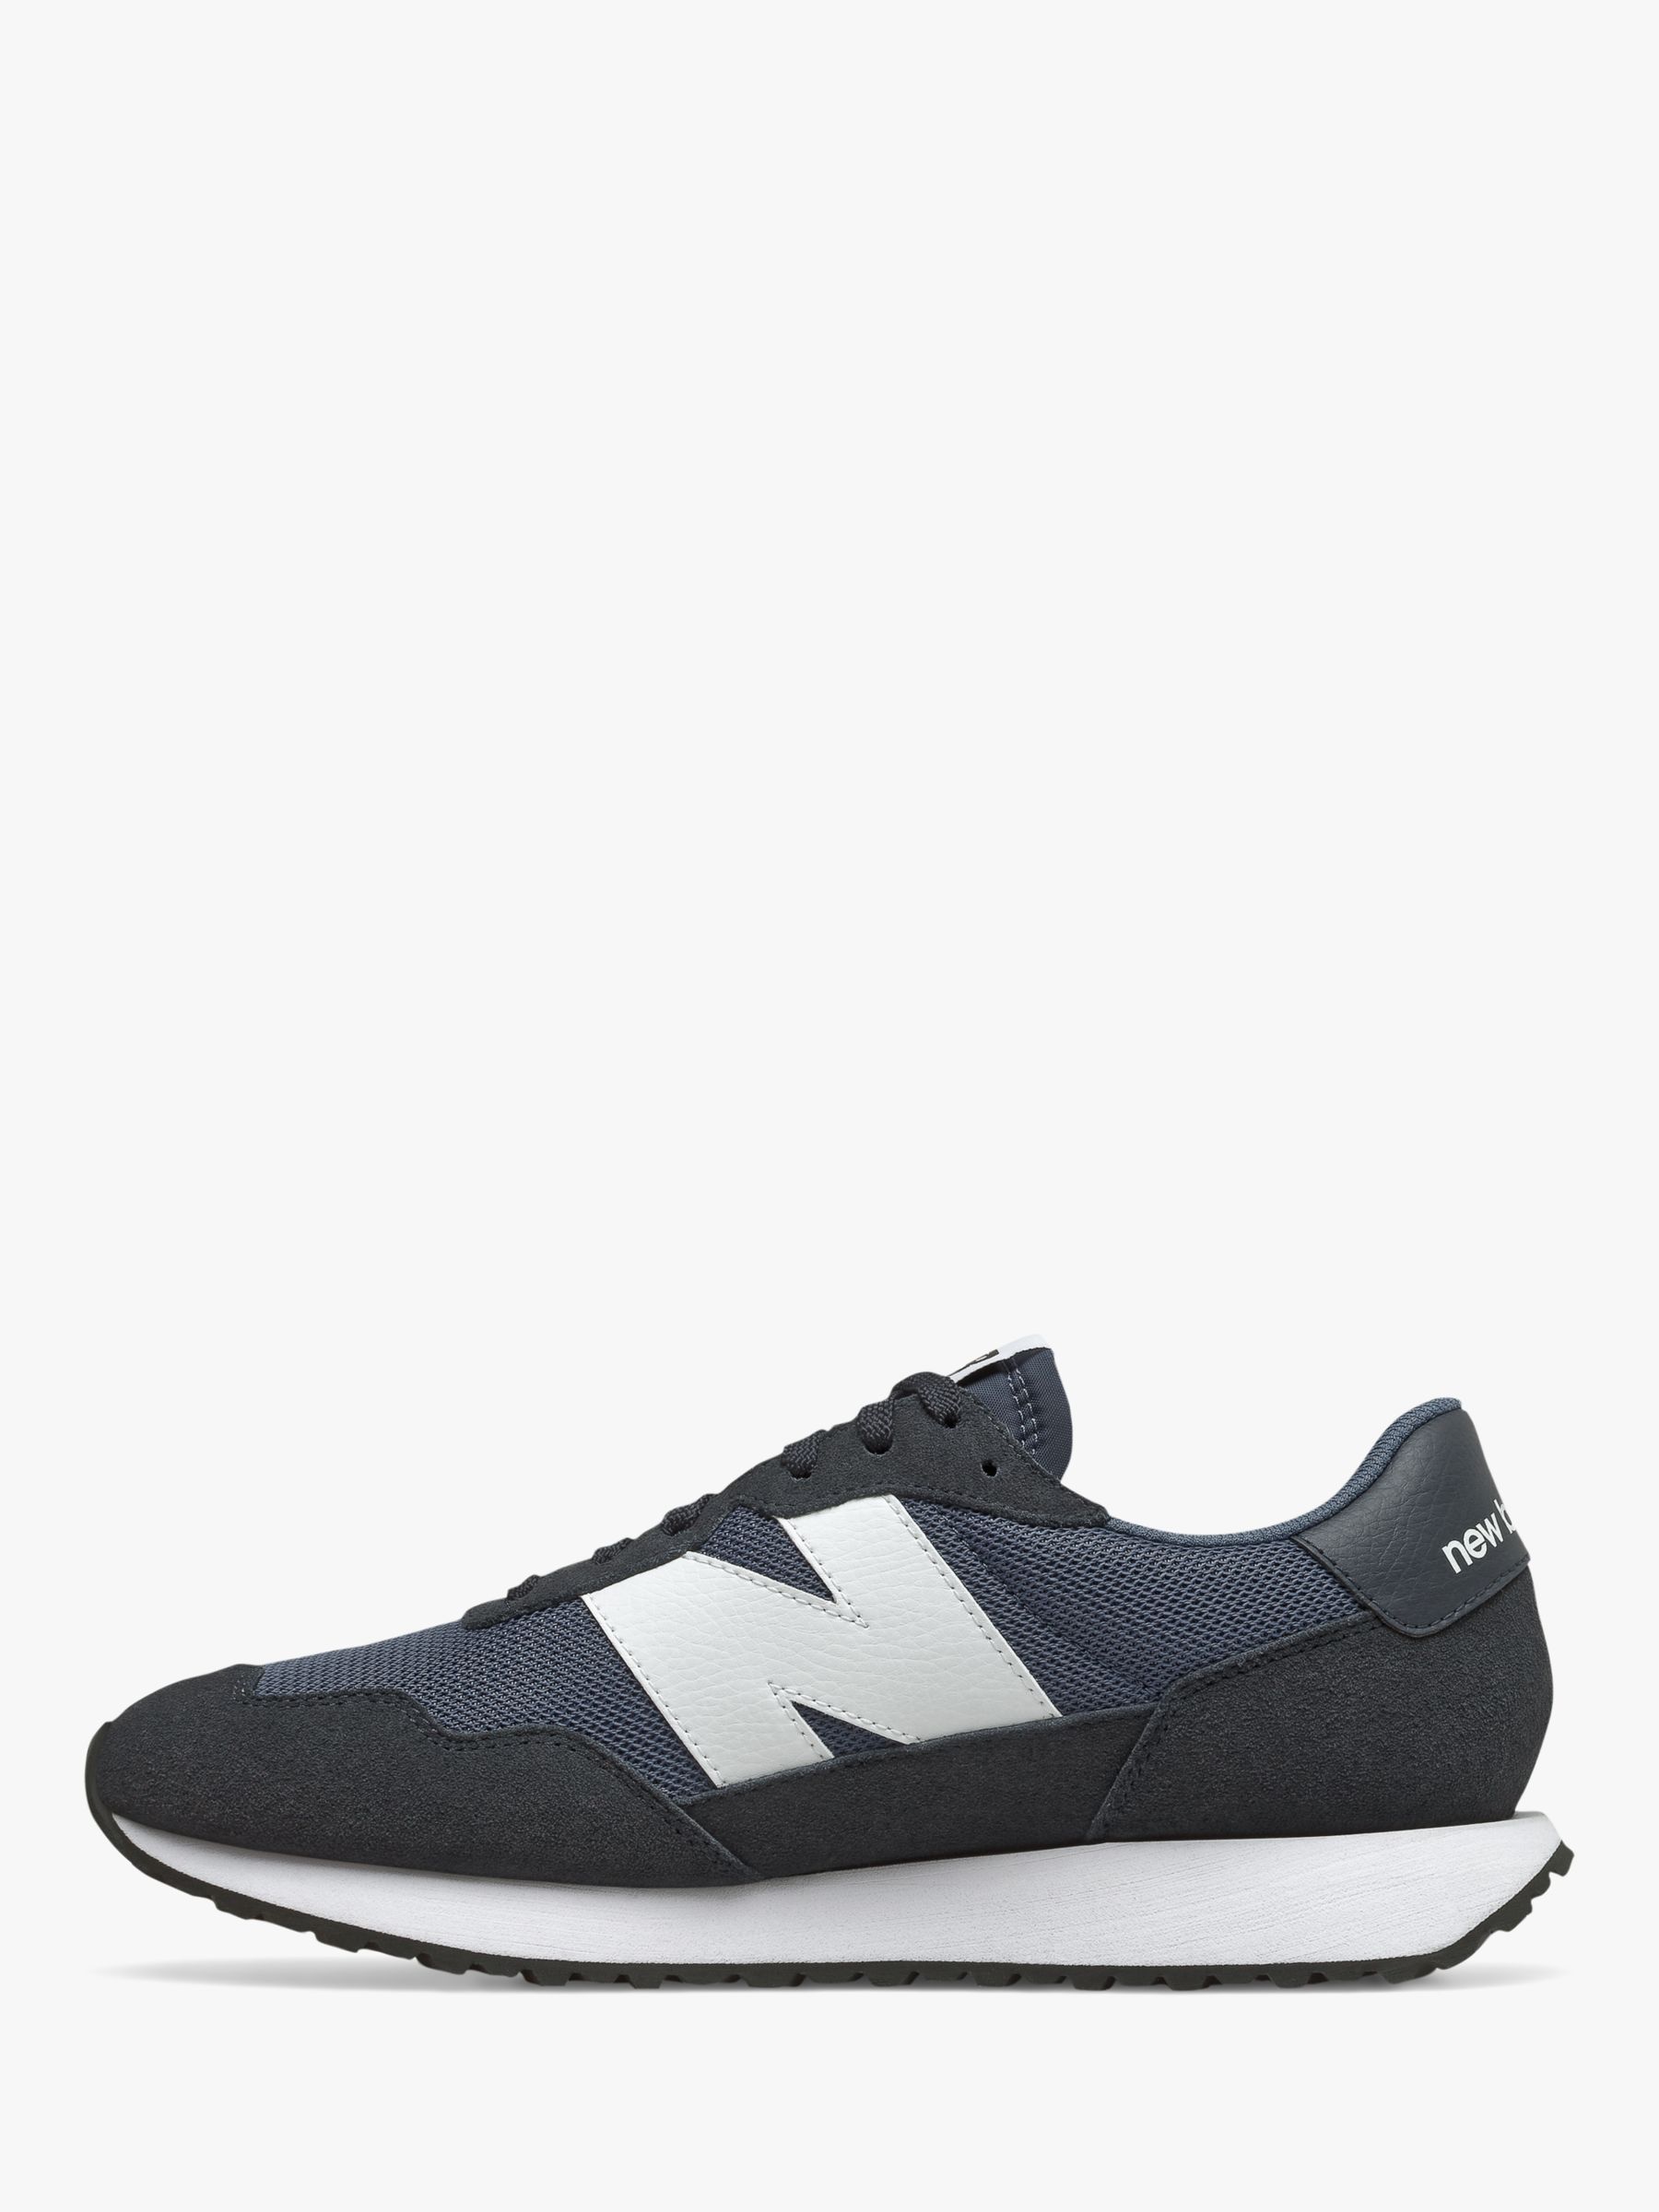 New Balance 237 Men's Suede Lace Up Trainers, Vintage Indigo/Outerspace ...